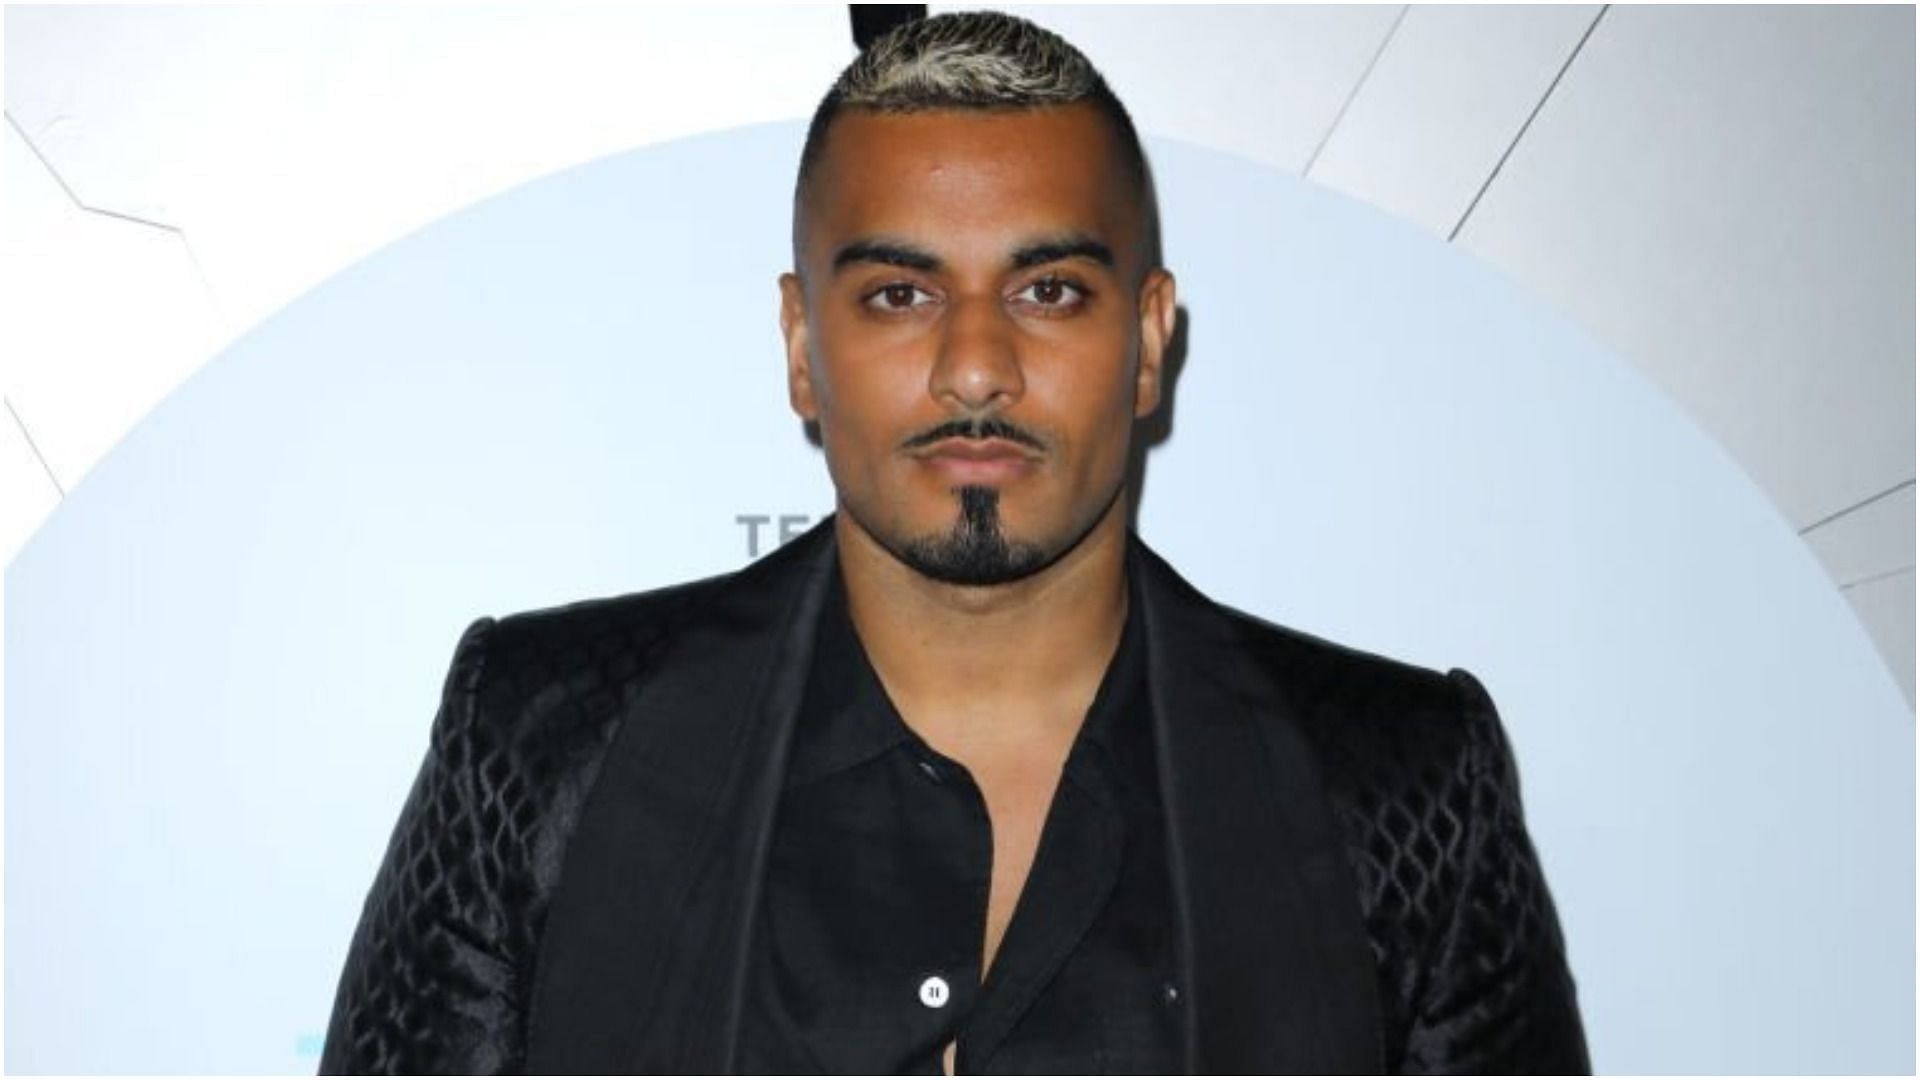 Umar Kamani is mostly known as the co-founder of PrettyLittleThing.com (Image via JC Olivera/Getty Images)